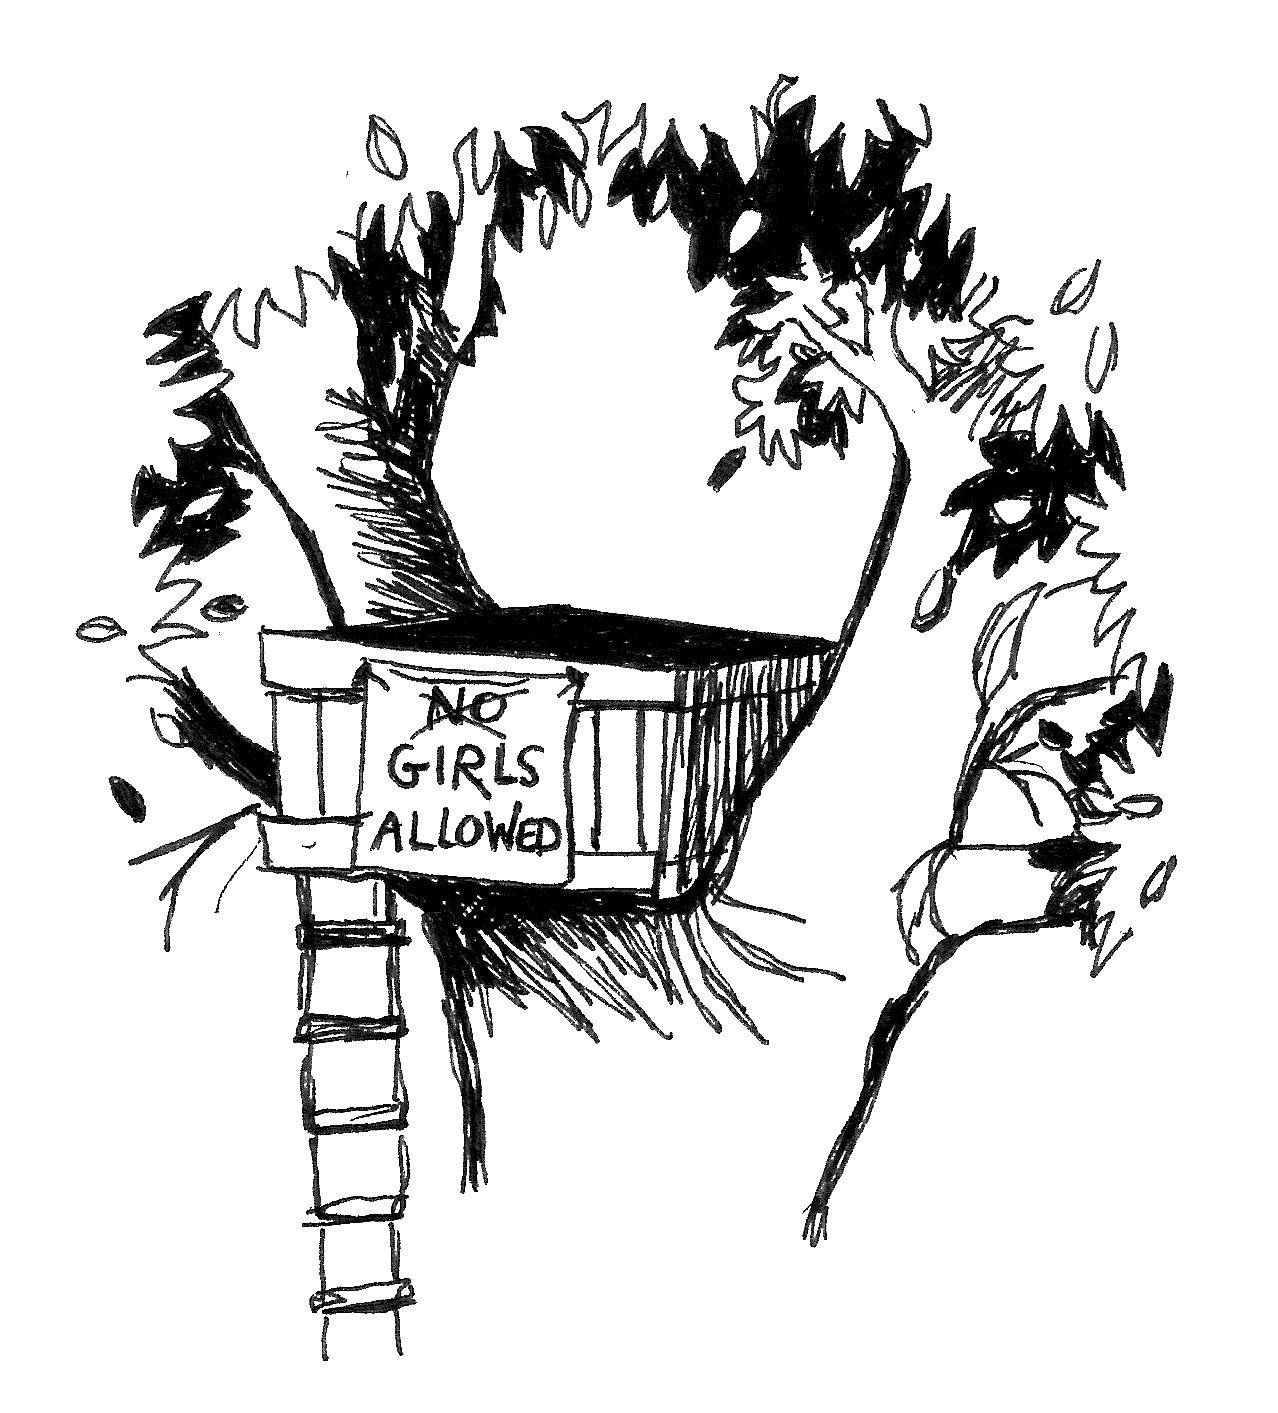 Coloring Girls allowed. Category Halloween. Tags:  Halloween, tree.